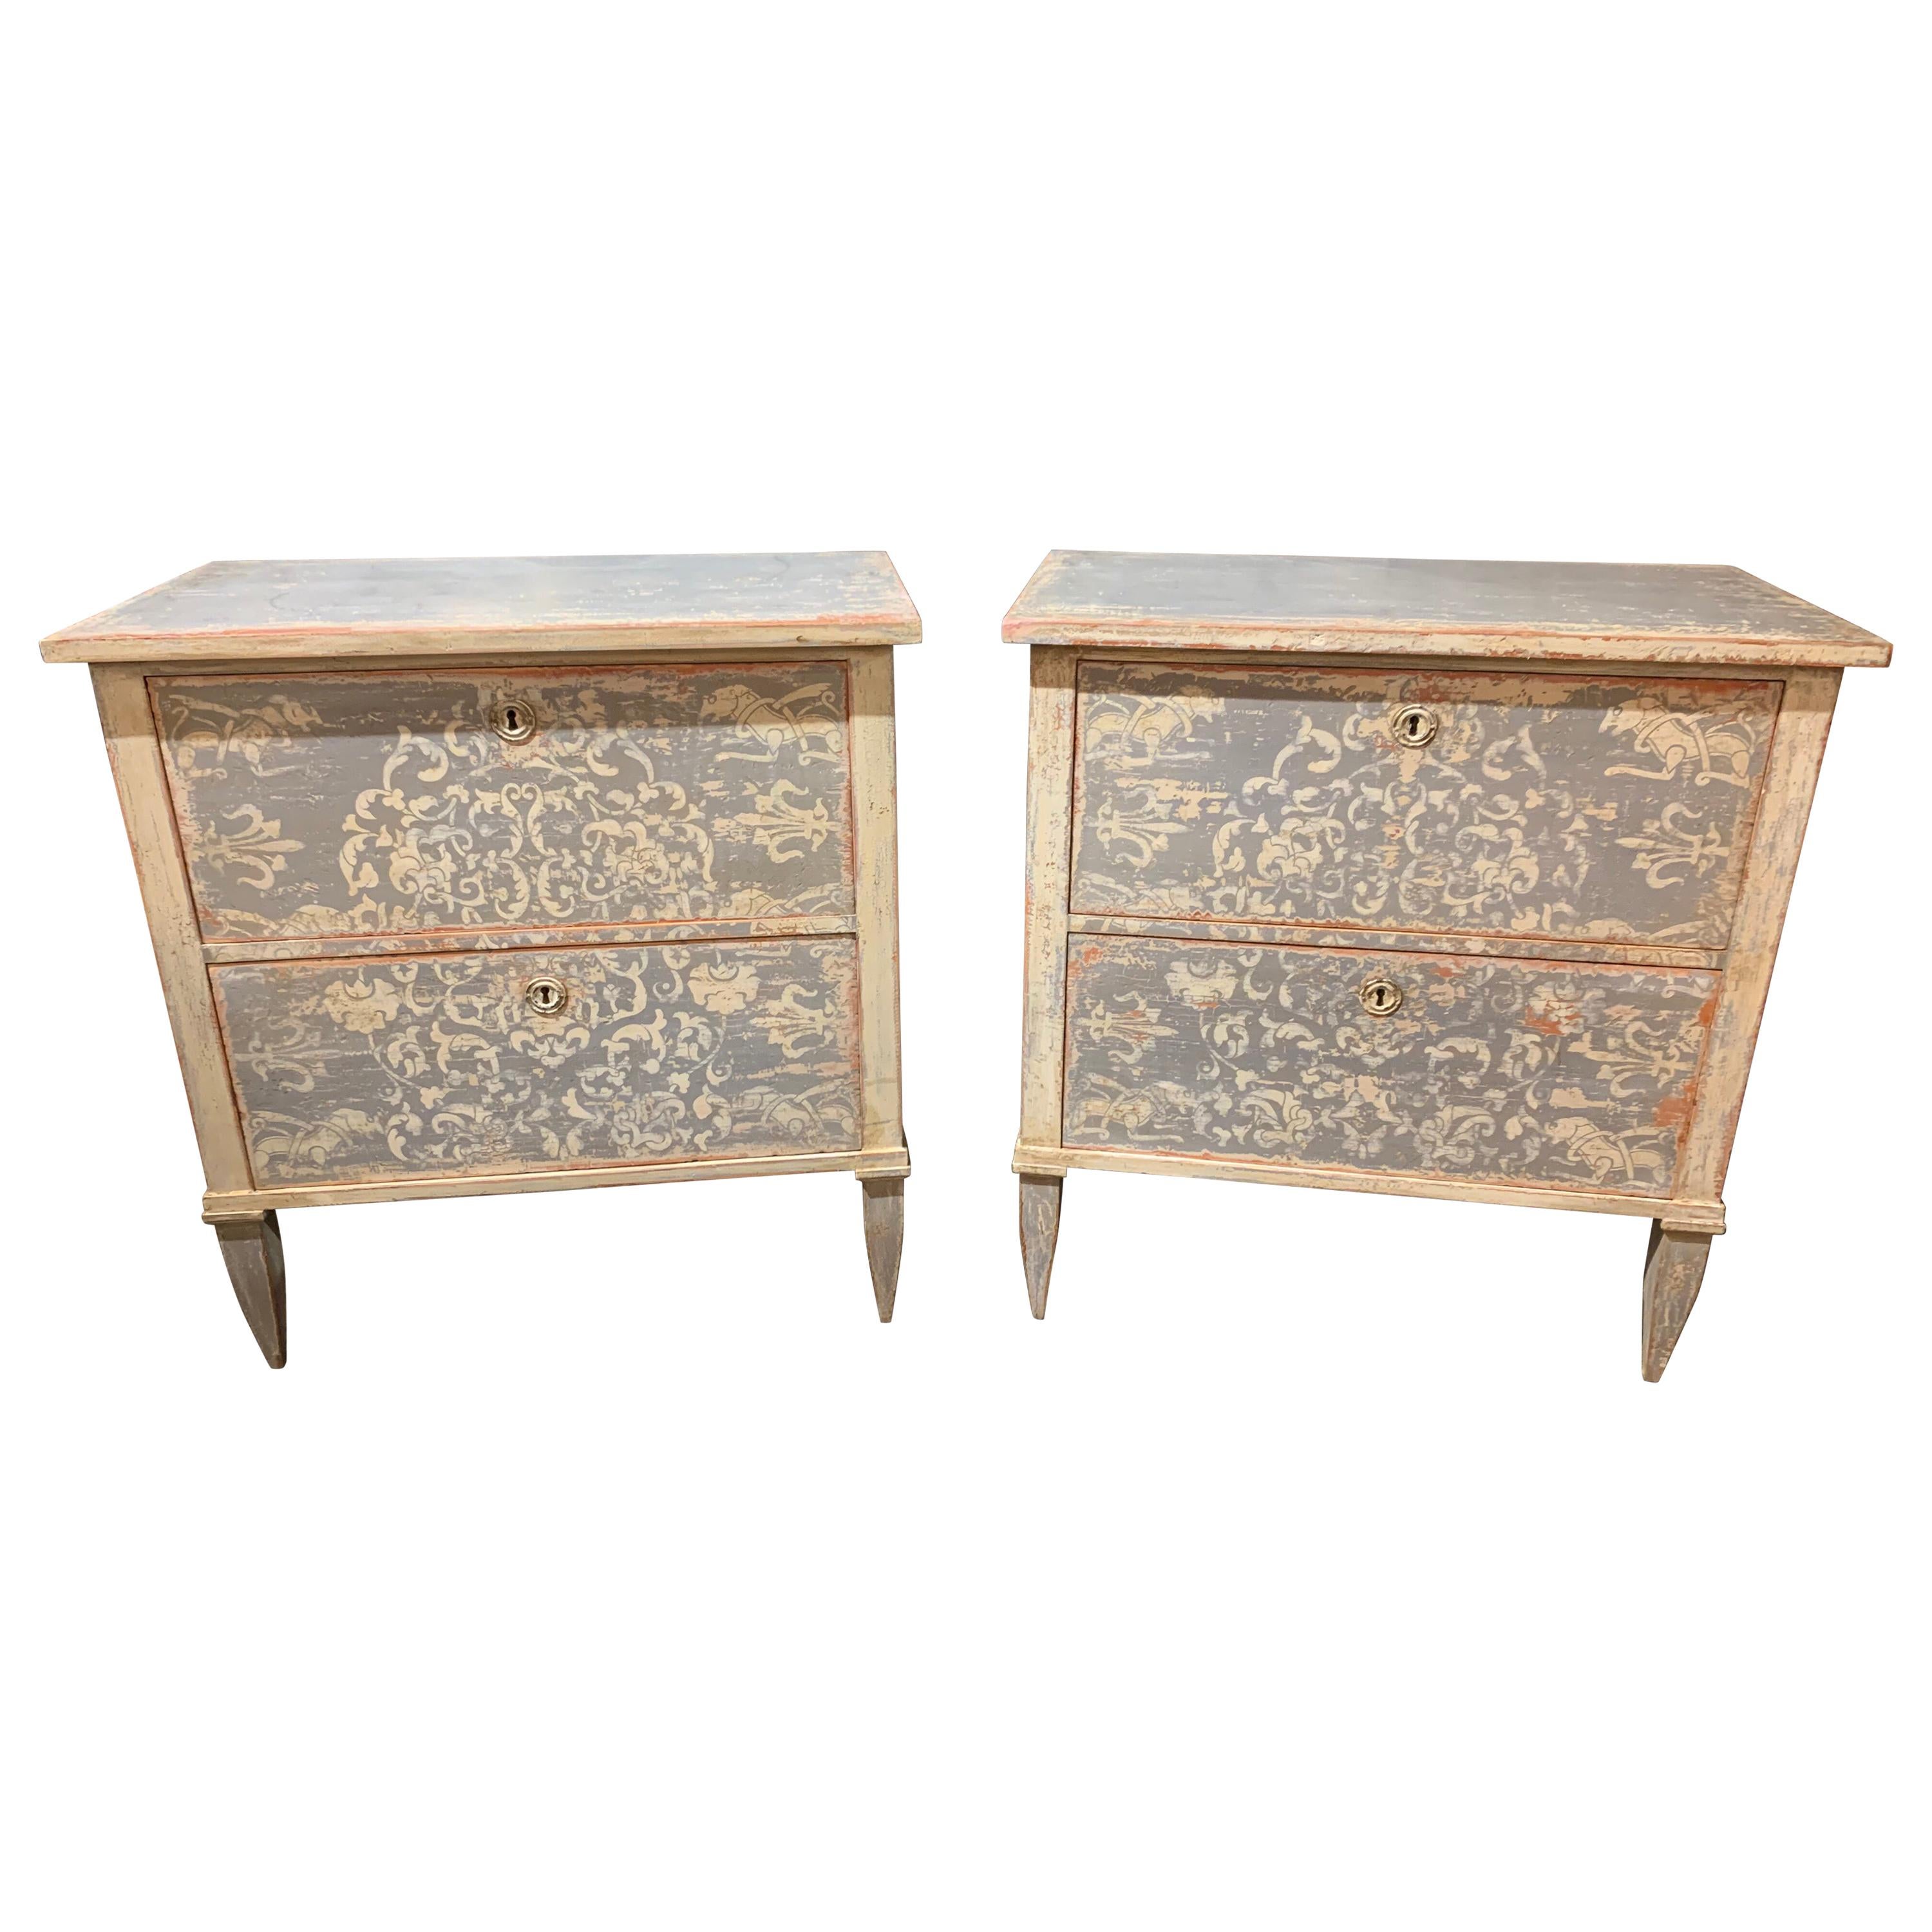 Pair of 19th Century Neoclassical Painted 2-Drawer Bed Side Tables